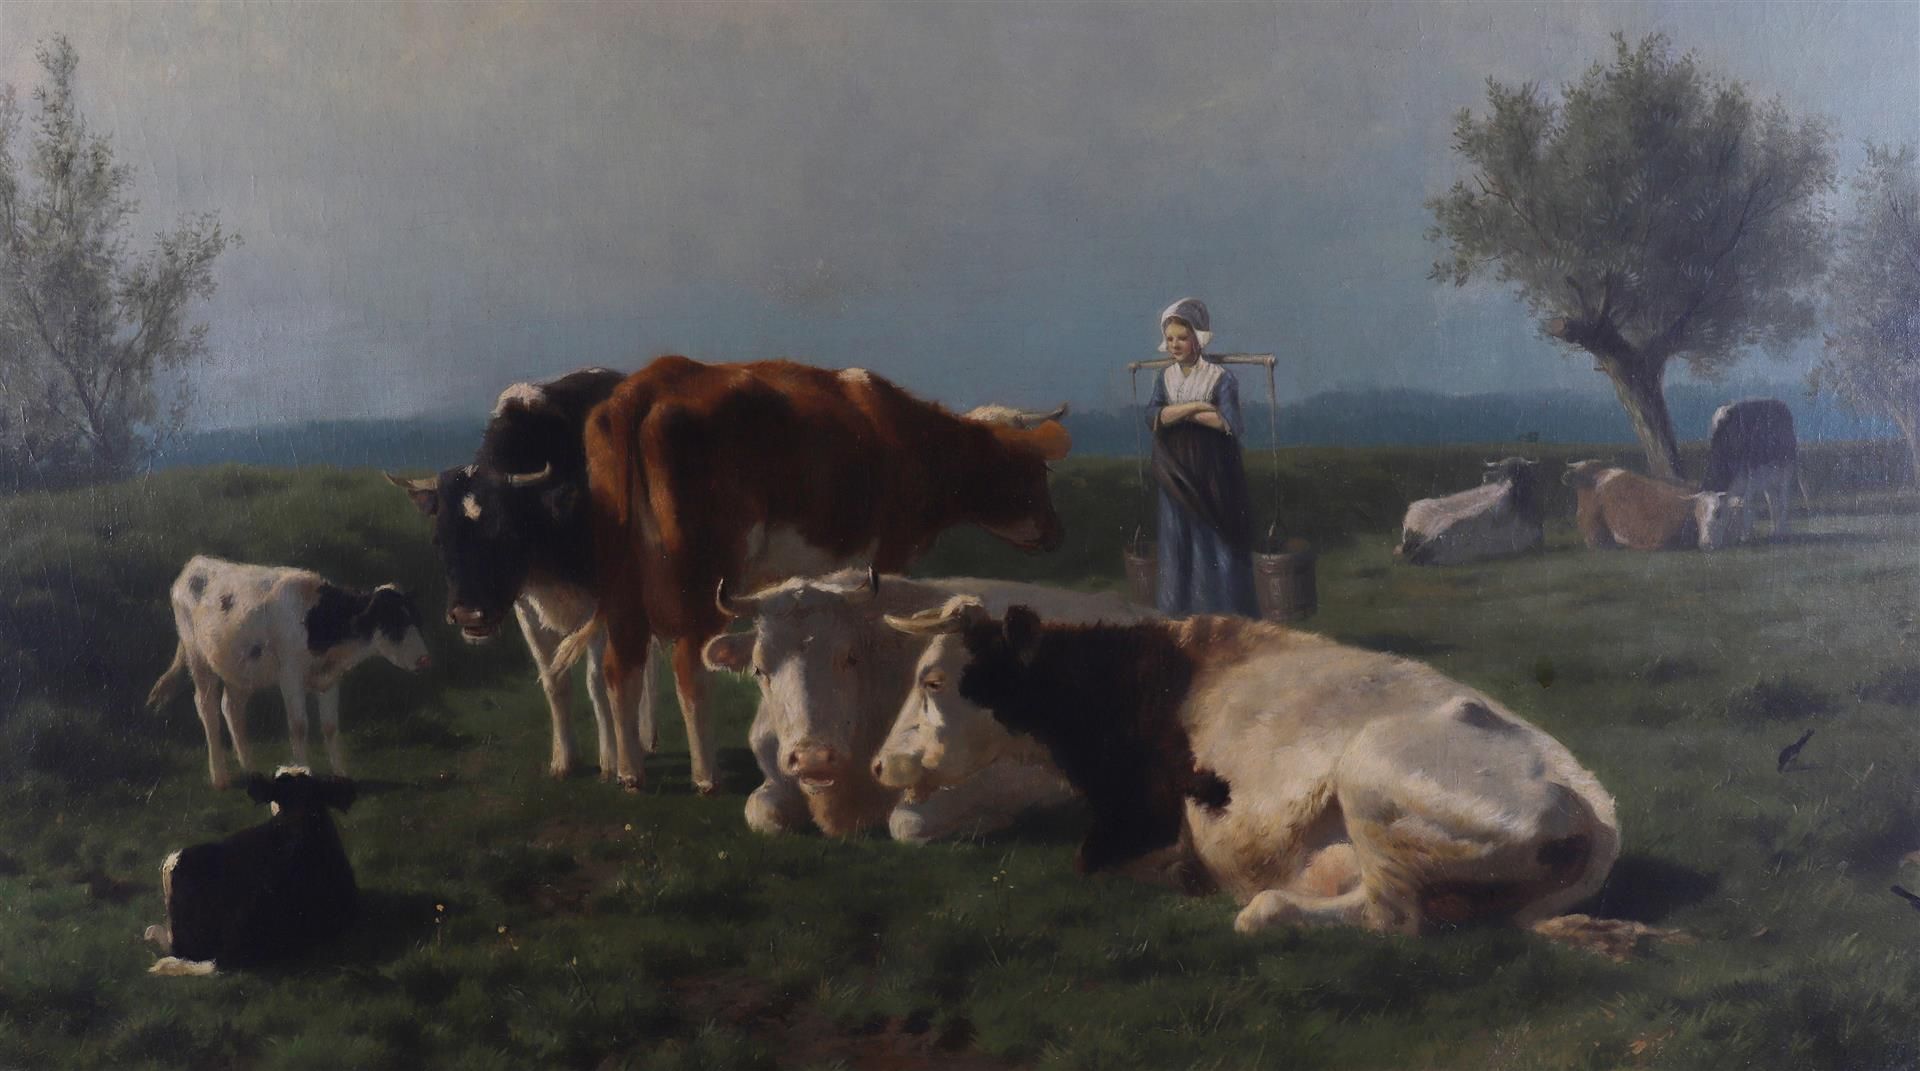 Mauve, Anthonie sr (Zaandam 1838-1888) "Cows and milkmaid in a landscape with pollard willows", - Image 9 of 18